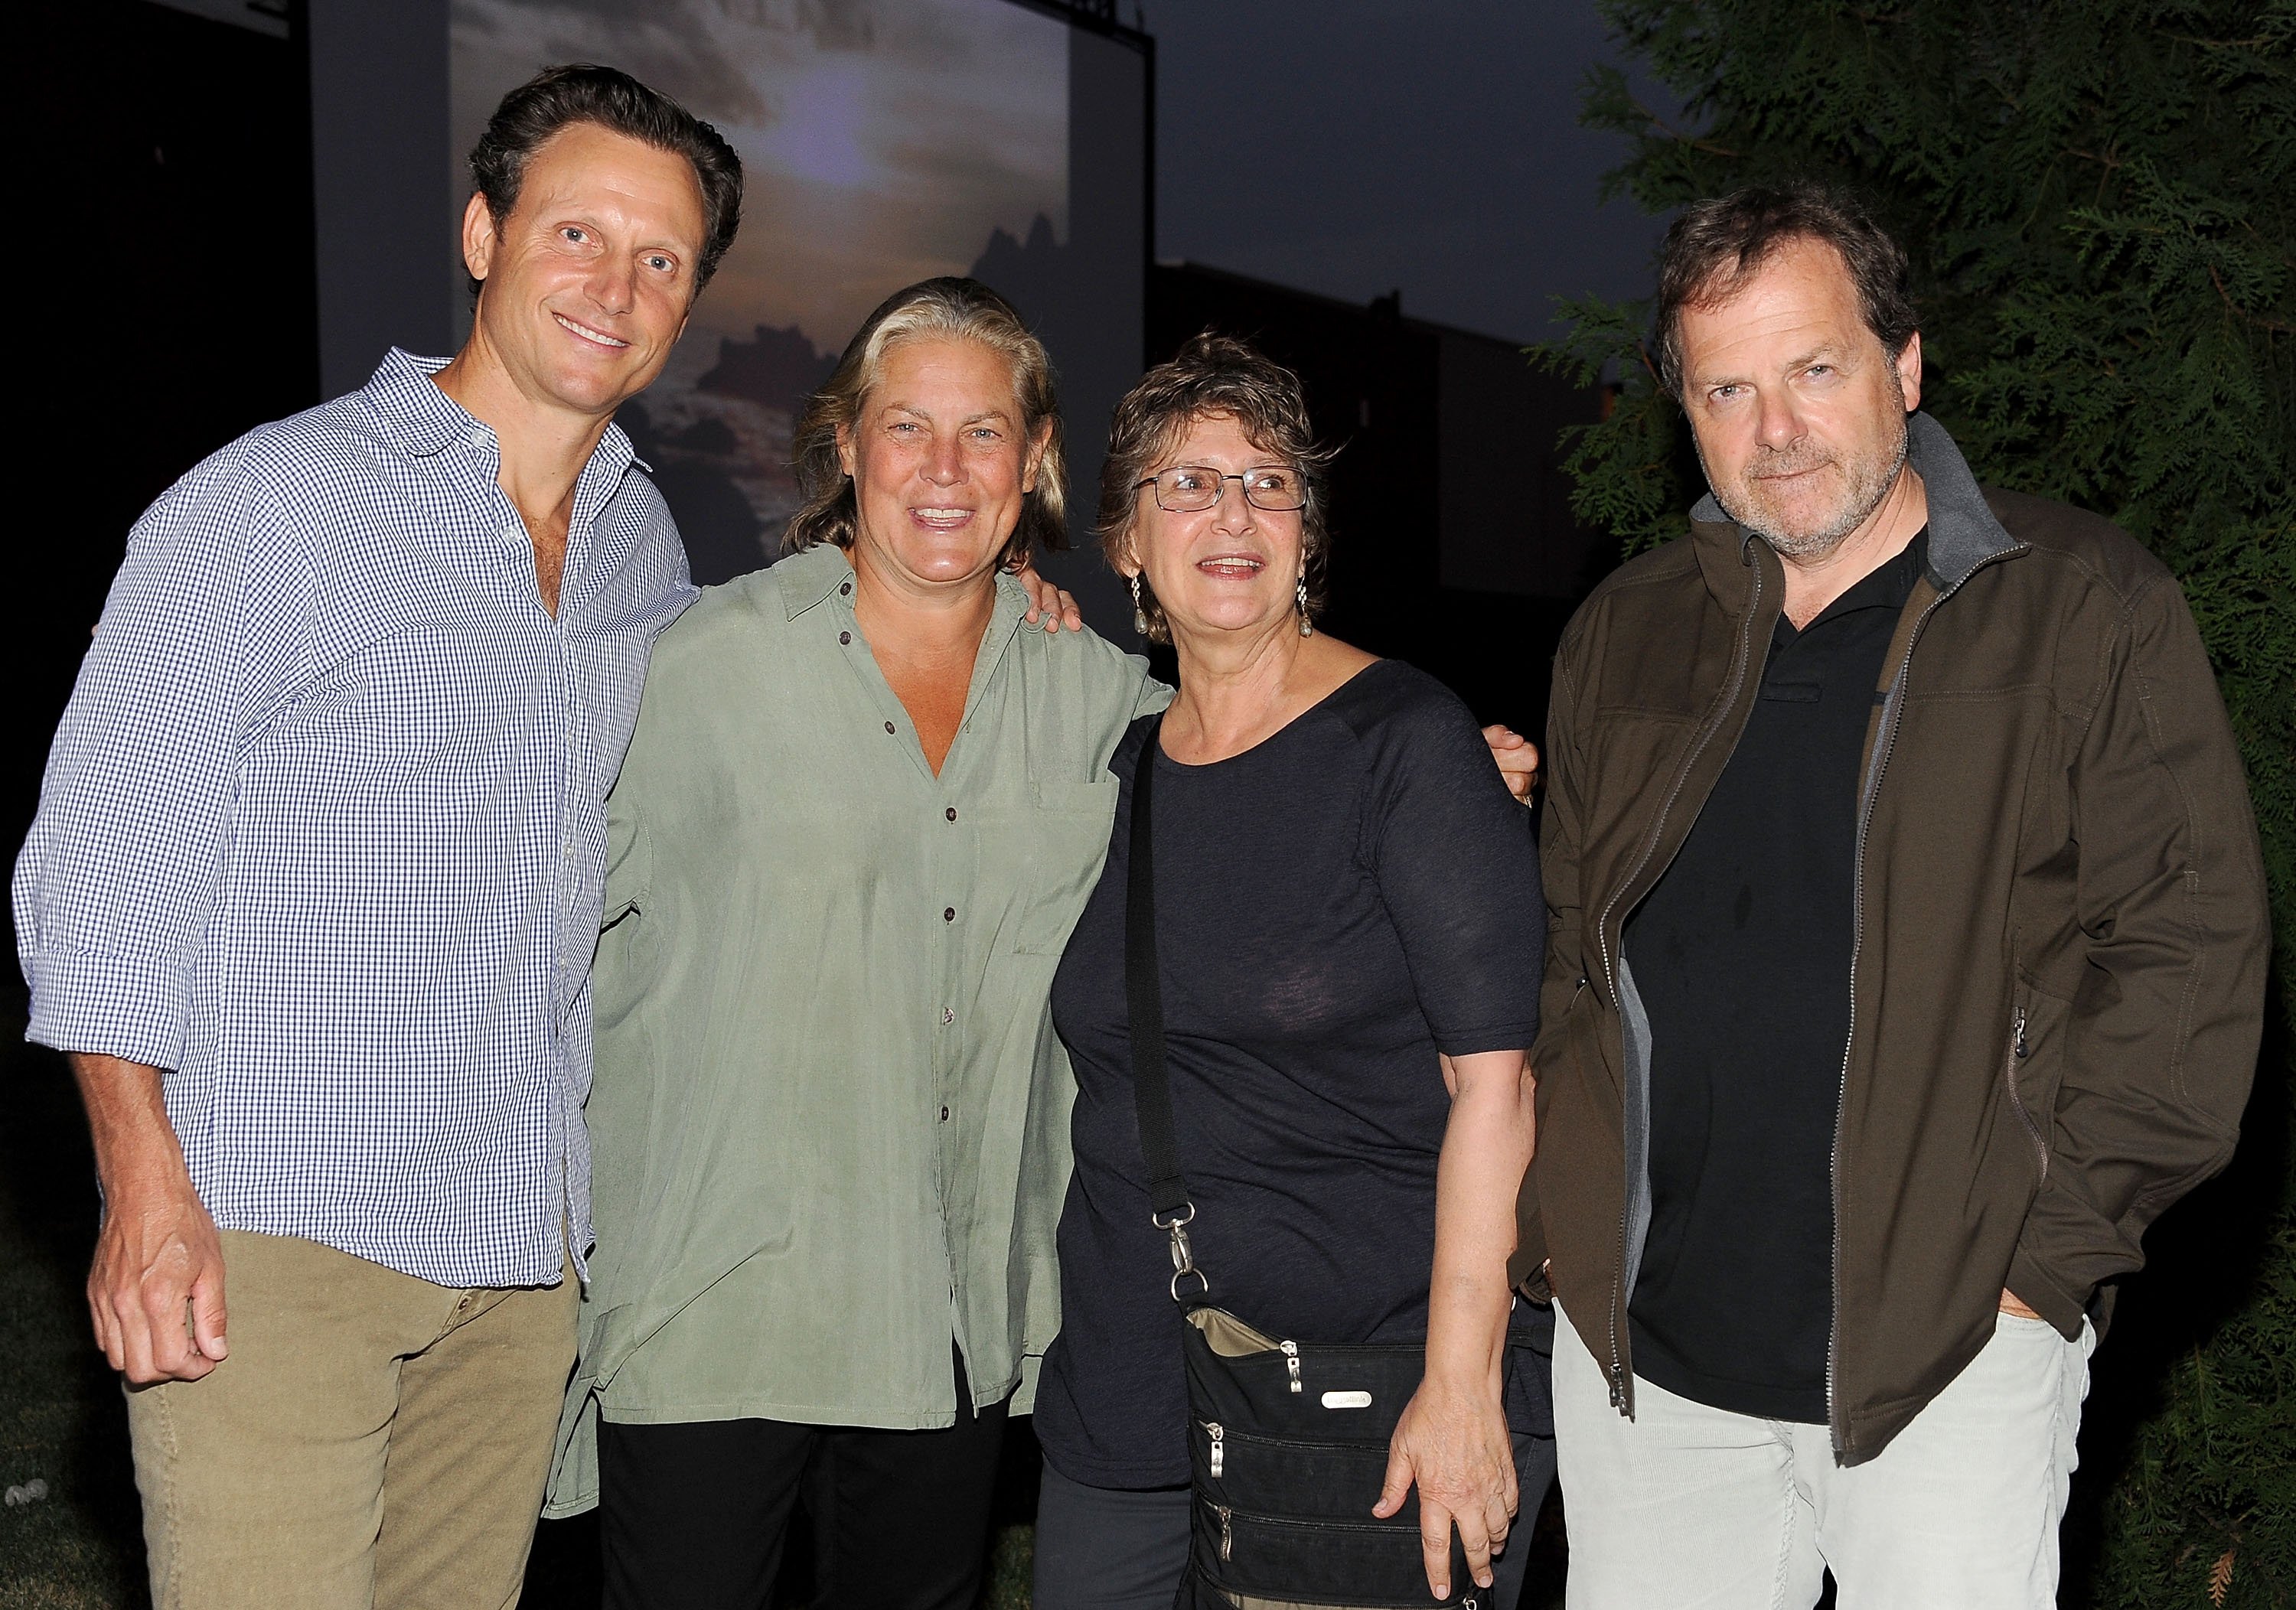 L-R) Tony Goldwyn, Jane Musky, Jane Jenkins and Steven-Charles Jaffe pose for a photo at The Academy of Motion Picture Arts and Sciences' Oscars outdoors screening of "Ghost" on July 13, 2012, in Hollywood, California | Source: Getty Images